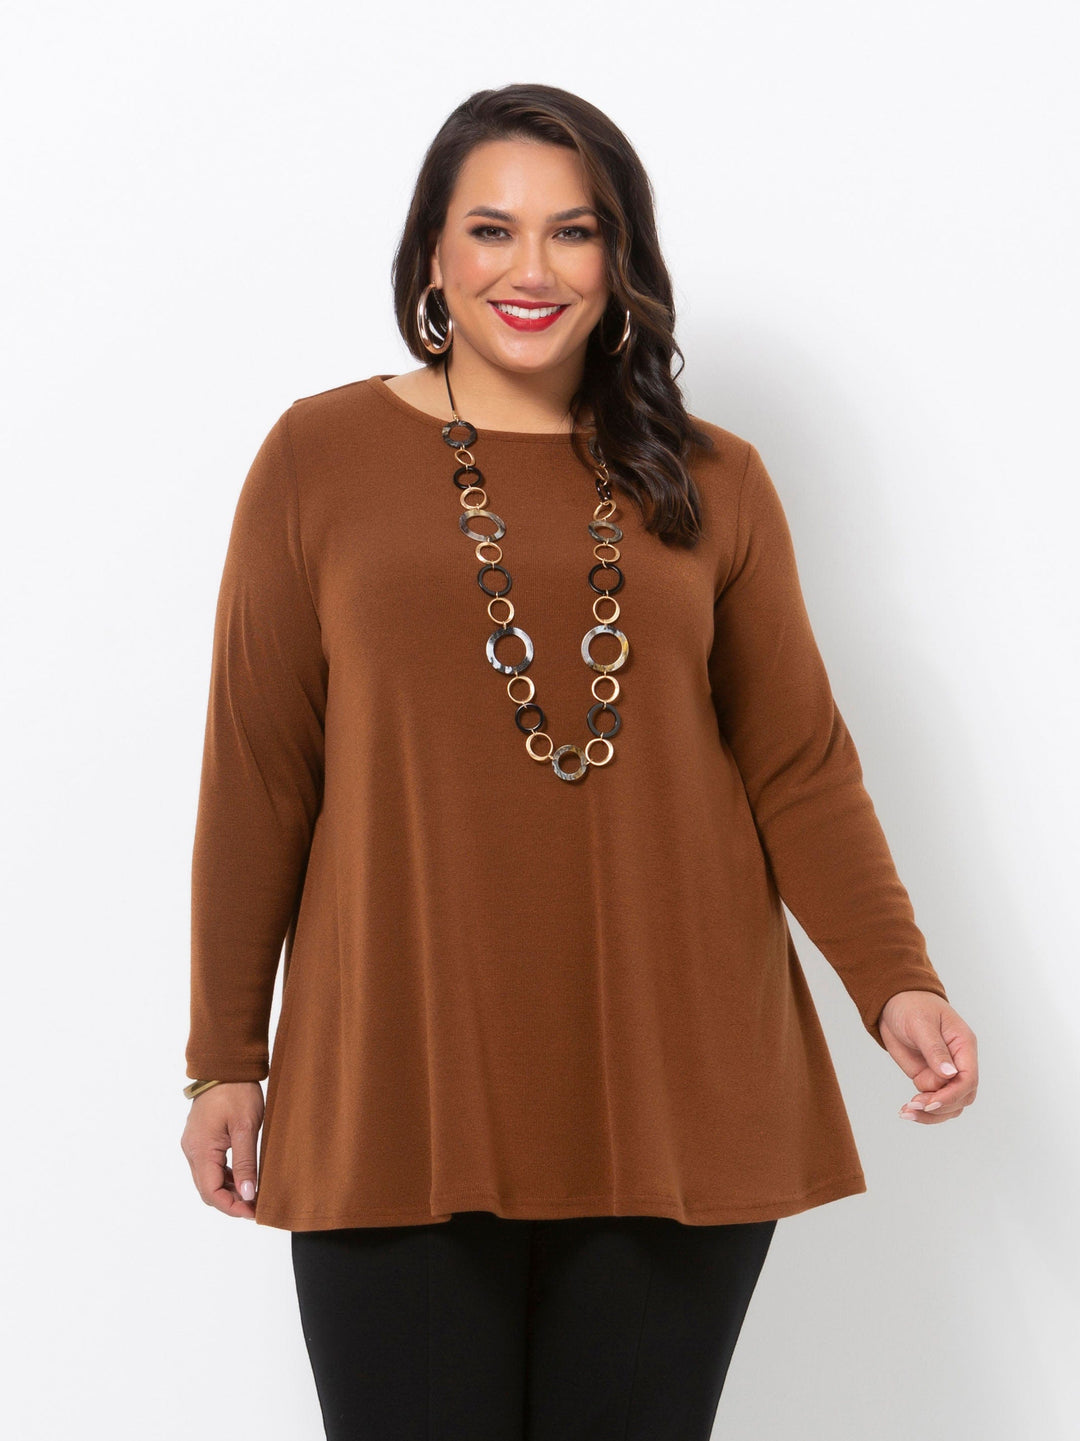 Toffee Amaretto Swing Top